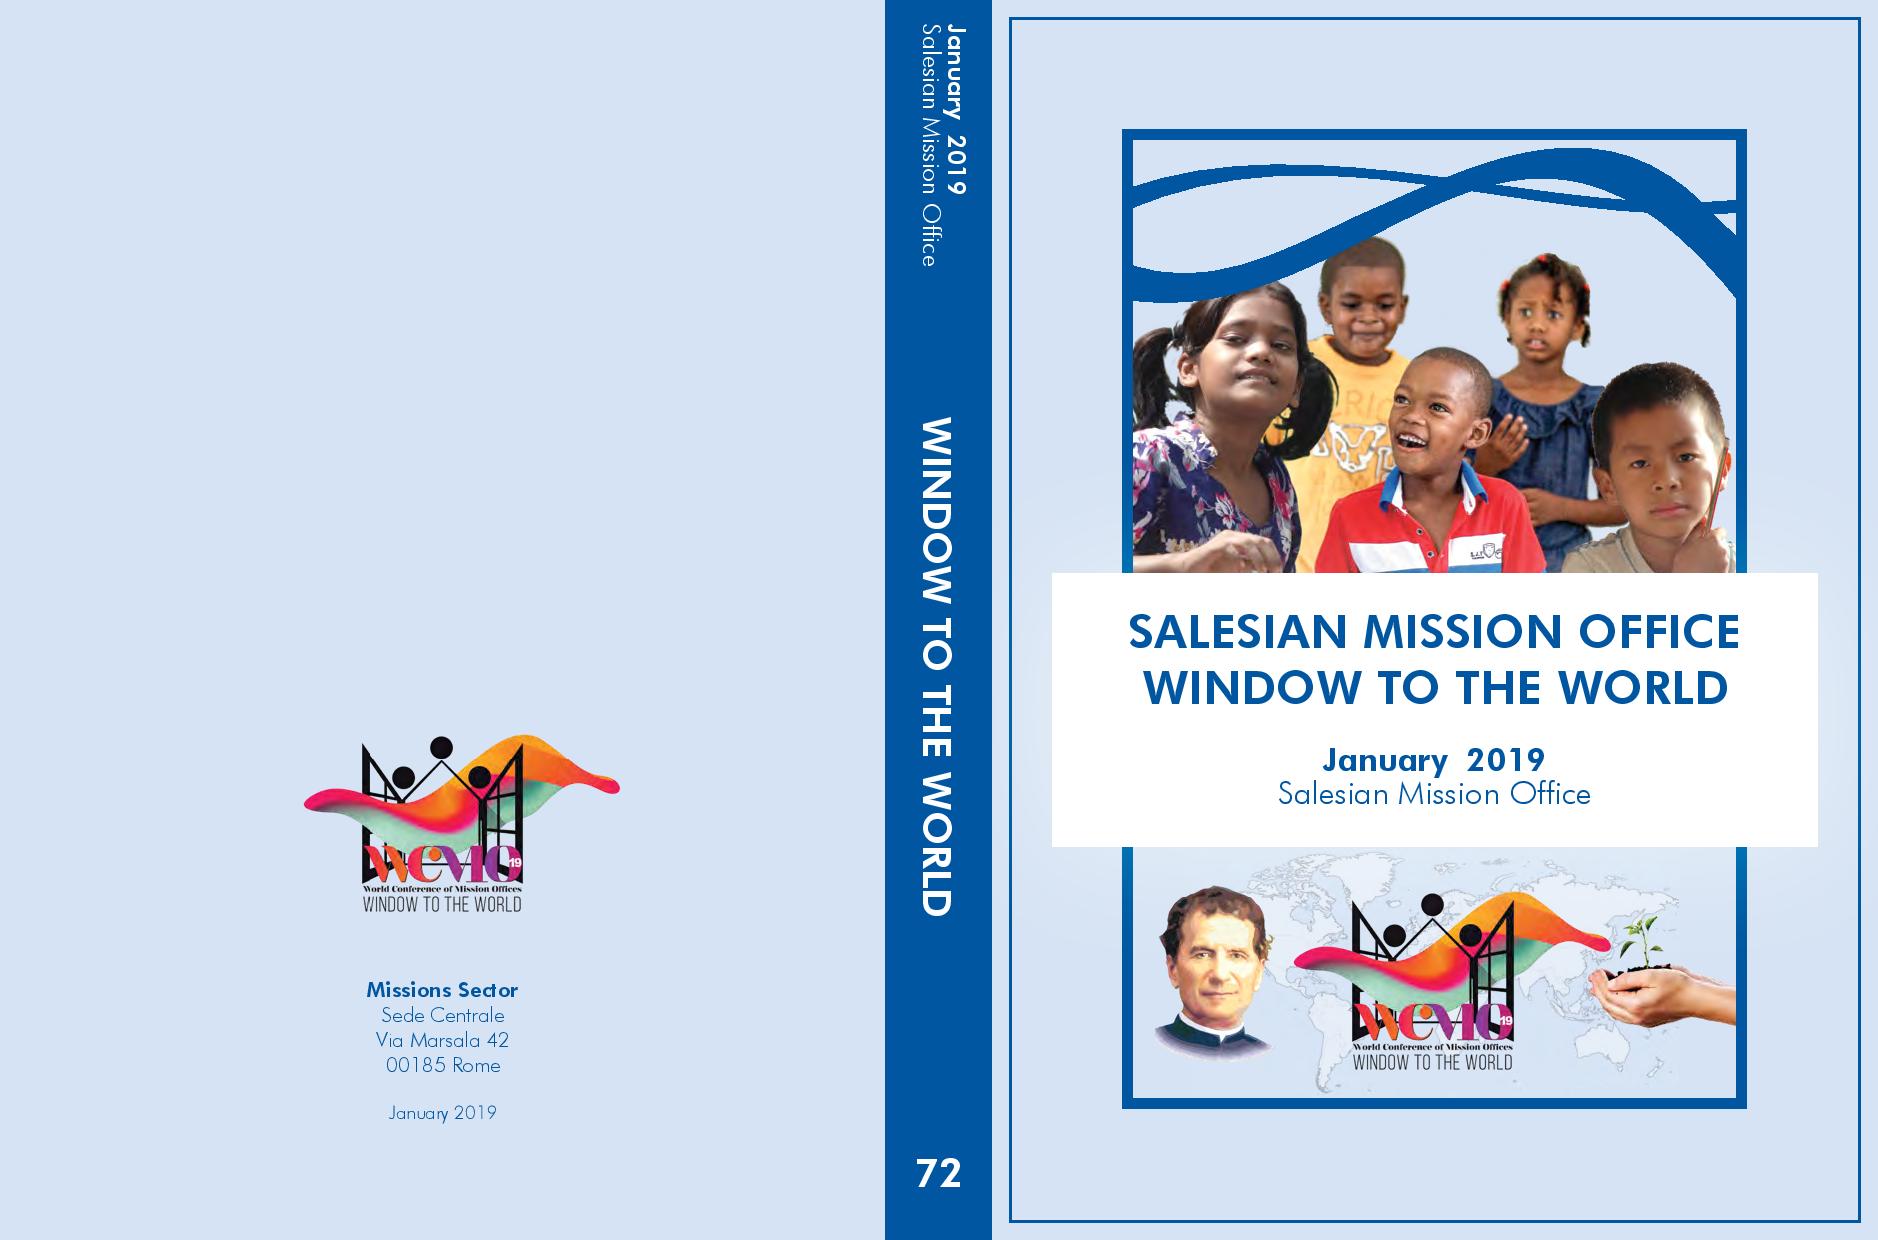 World Conference of Mission Offices 2019 - Final-page-001.jpg